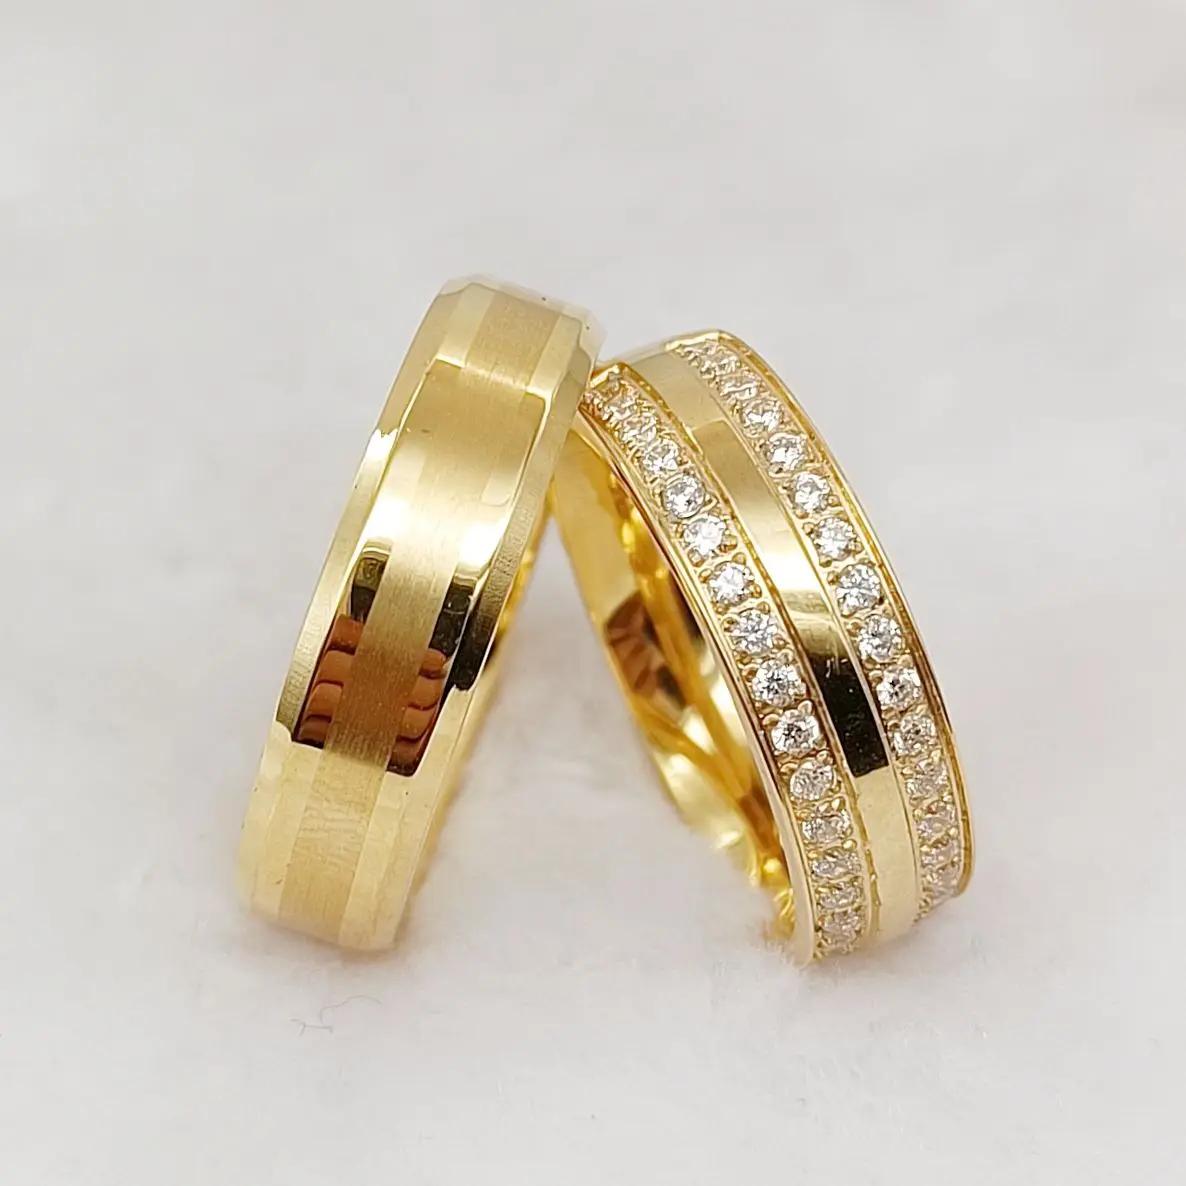 High Quality Love Wedding Rings Couple Sets For Men And Women Whole 18k Gold Plated Fashion Jewelry cz Diamond Marri